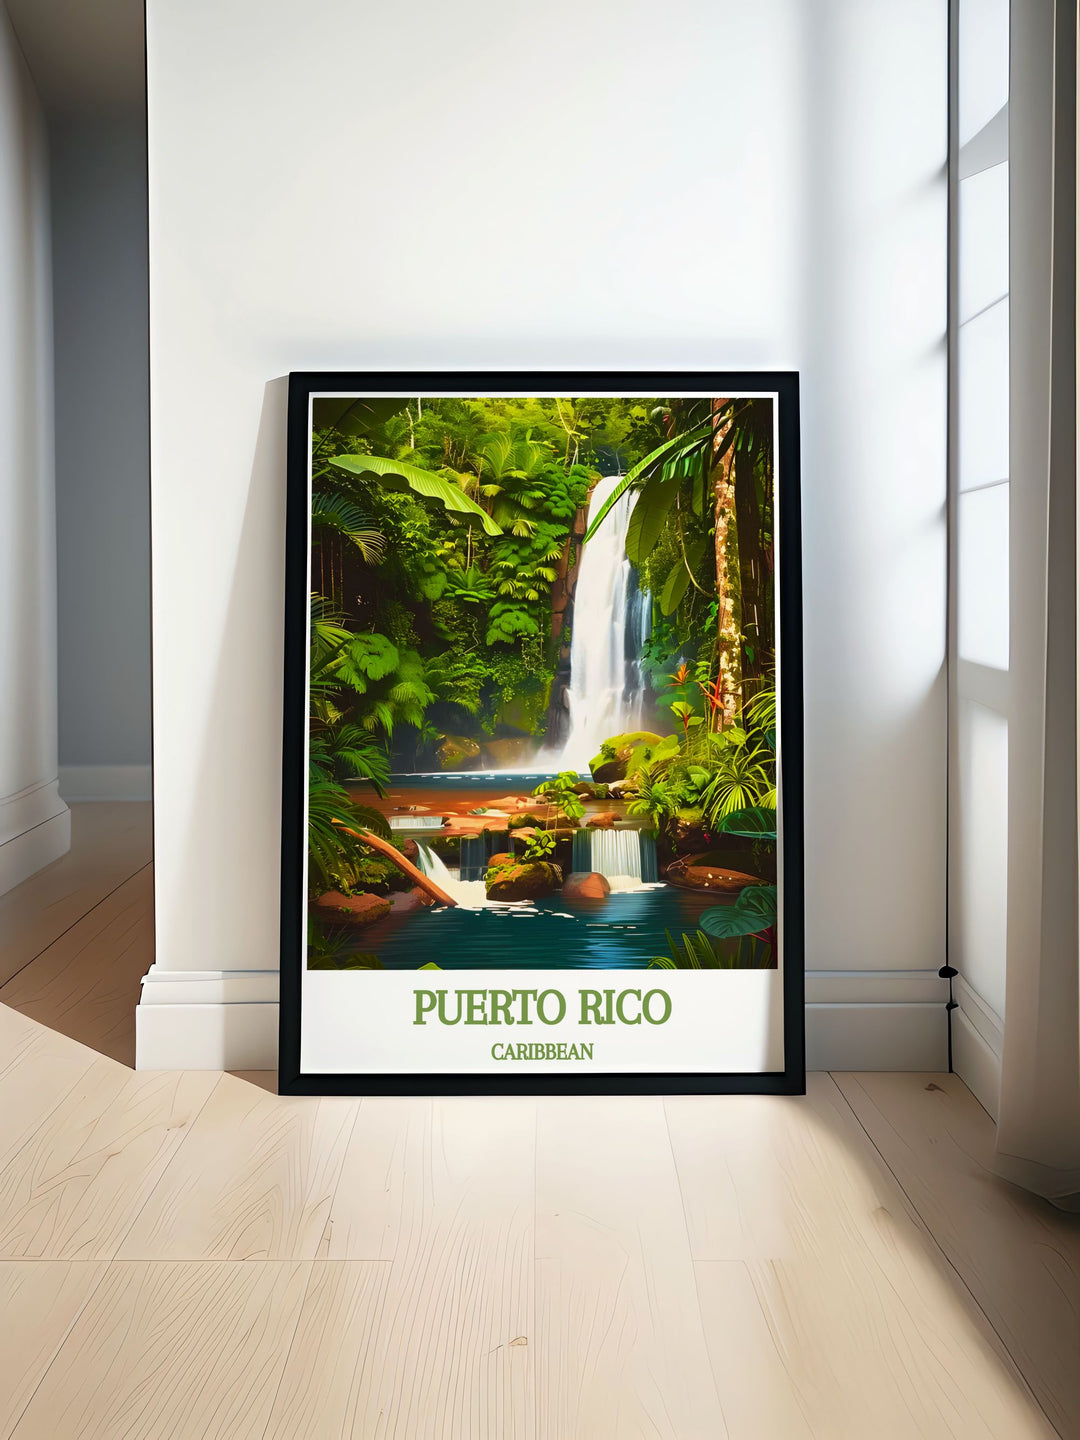 Stunning Puerto Rico poster featuring the lush CARIBBEAN, El Yunque National Forest with vibrant colors perfect for home decor or gifts. Ideal for those who appreciate Arecibo artwork and travel poster prints with a vintage touch.